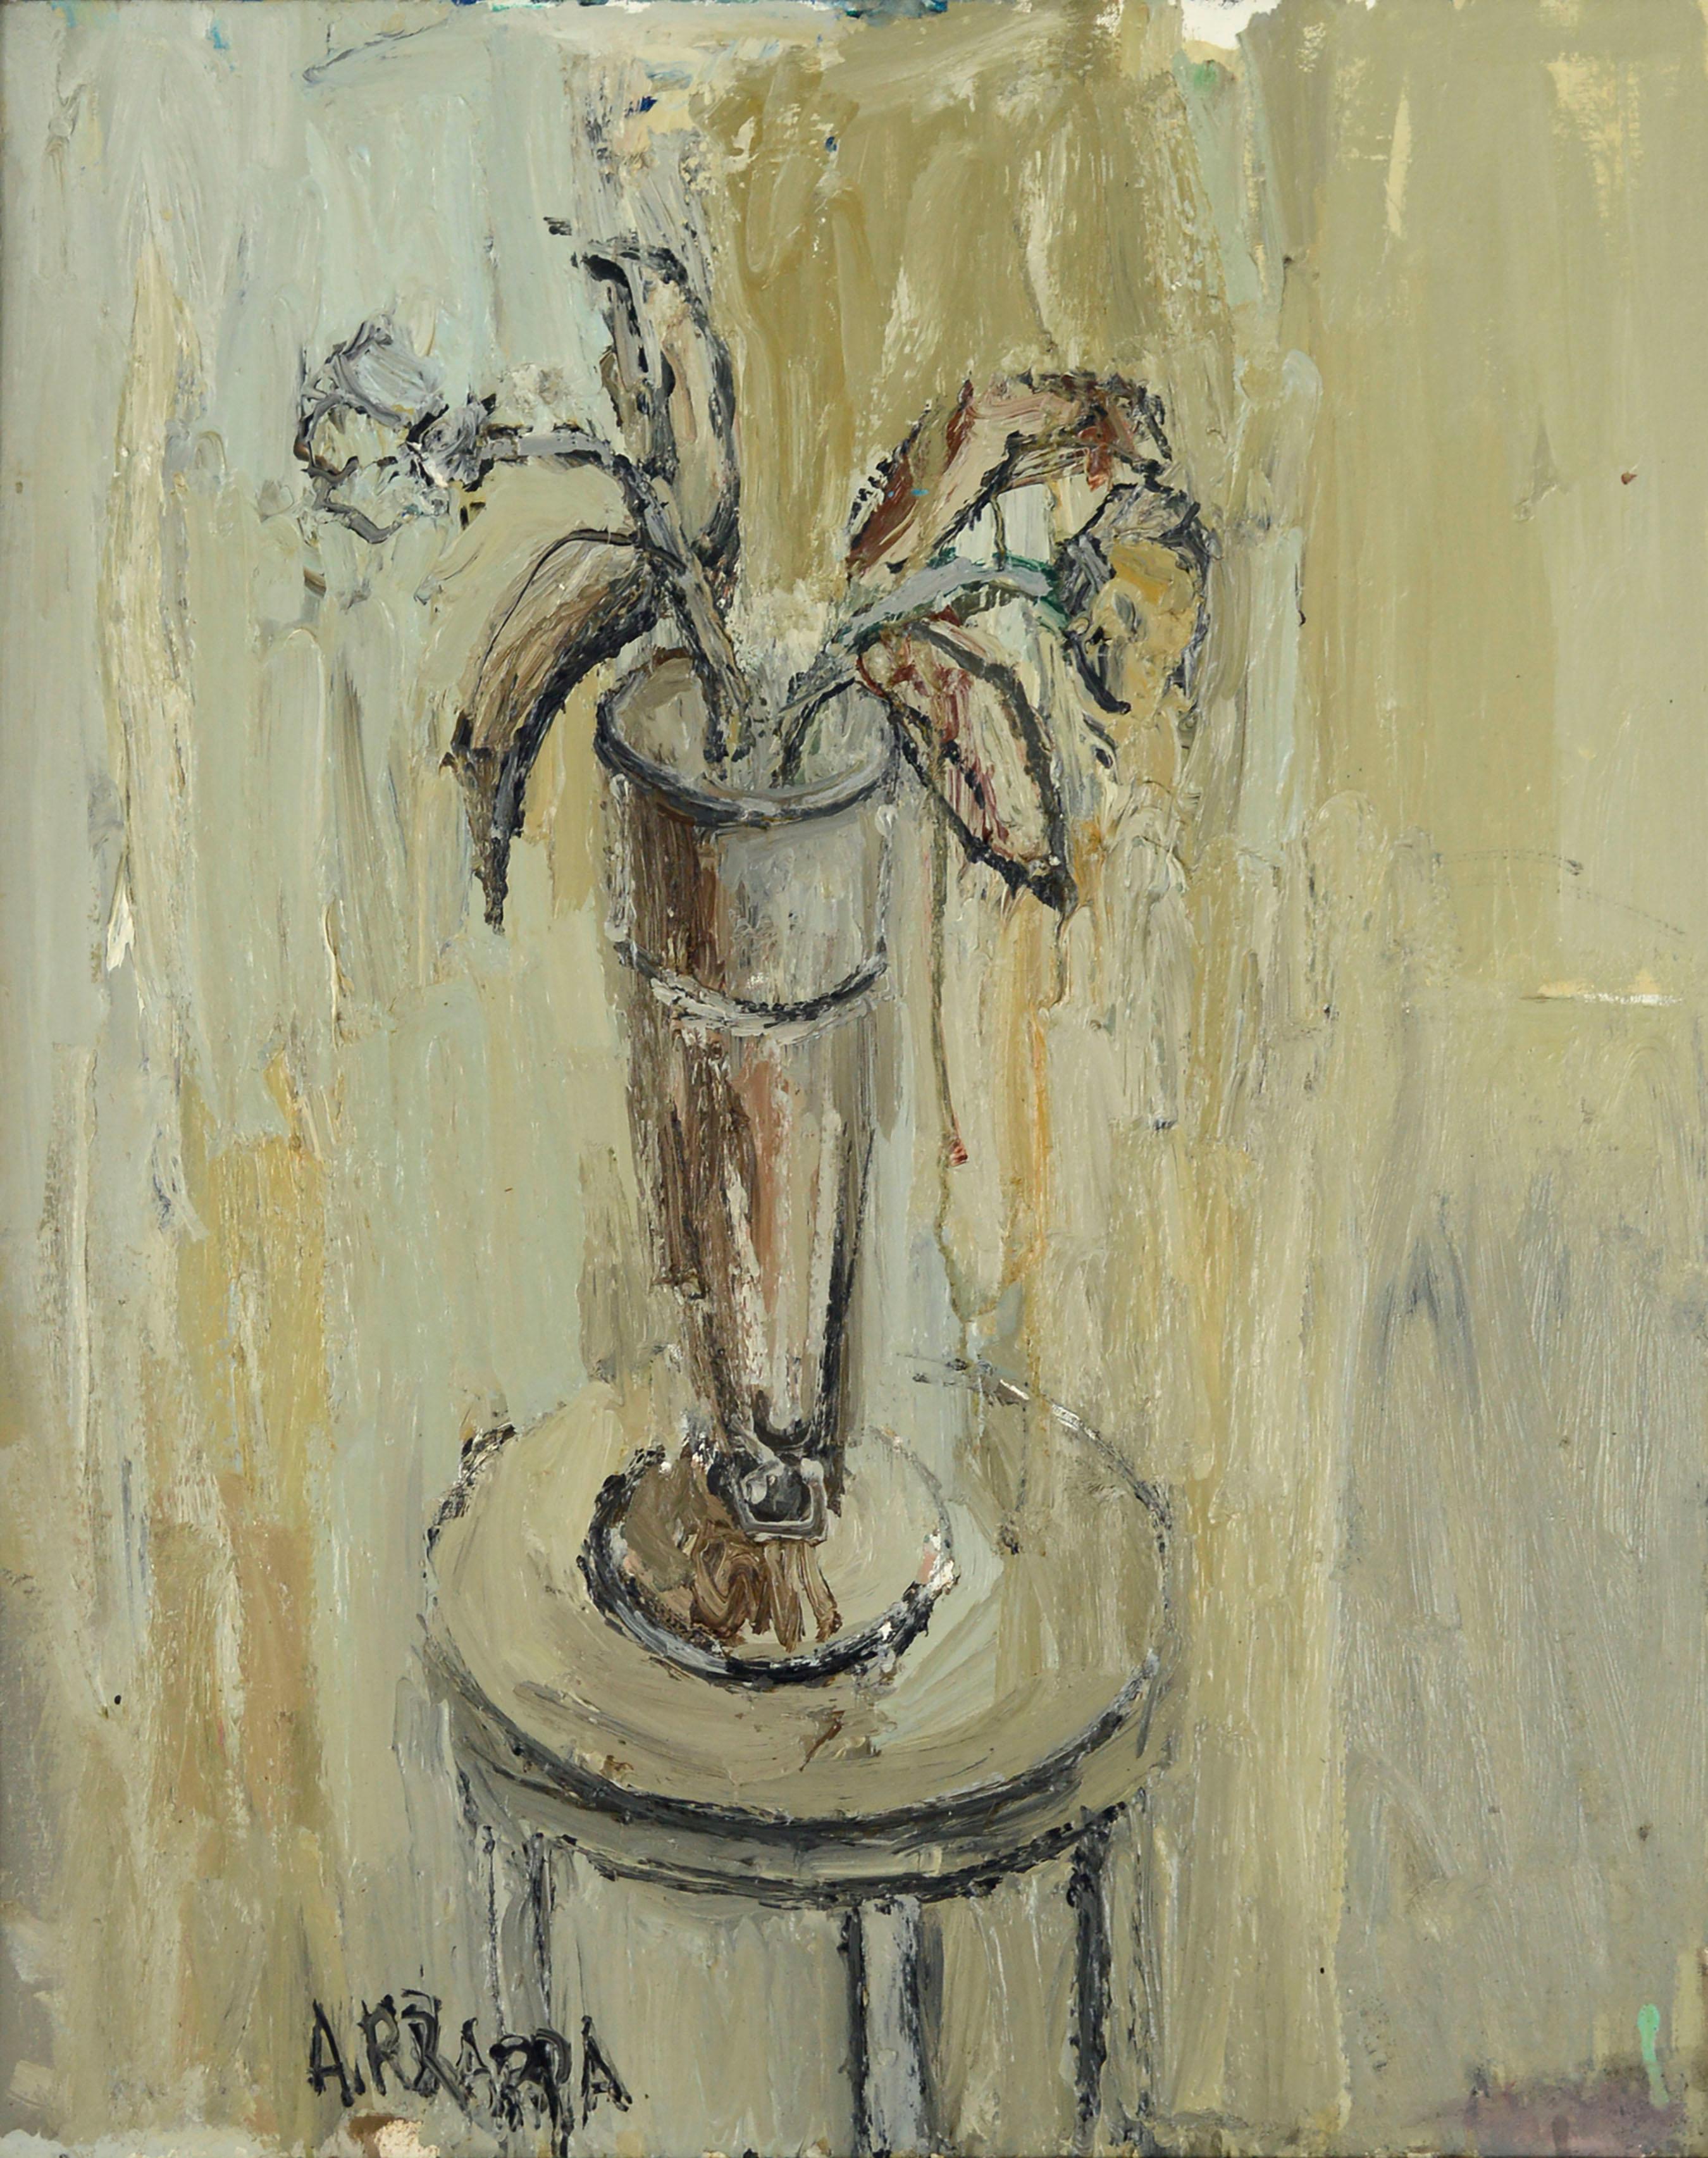 Monochromatic Abstracted Modern Floral Still-Life in Cool Neutral Earthtones - Painting by Anthony Rappa